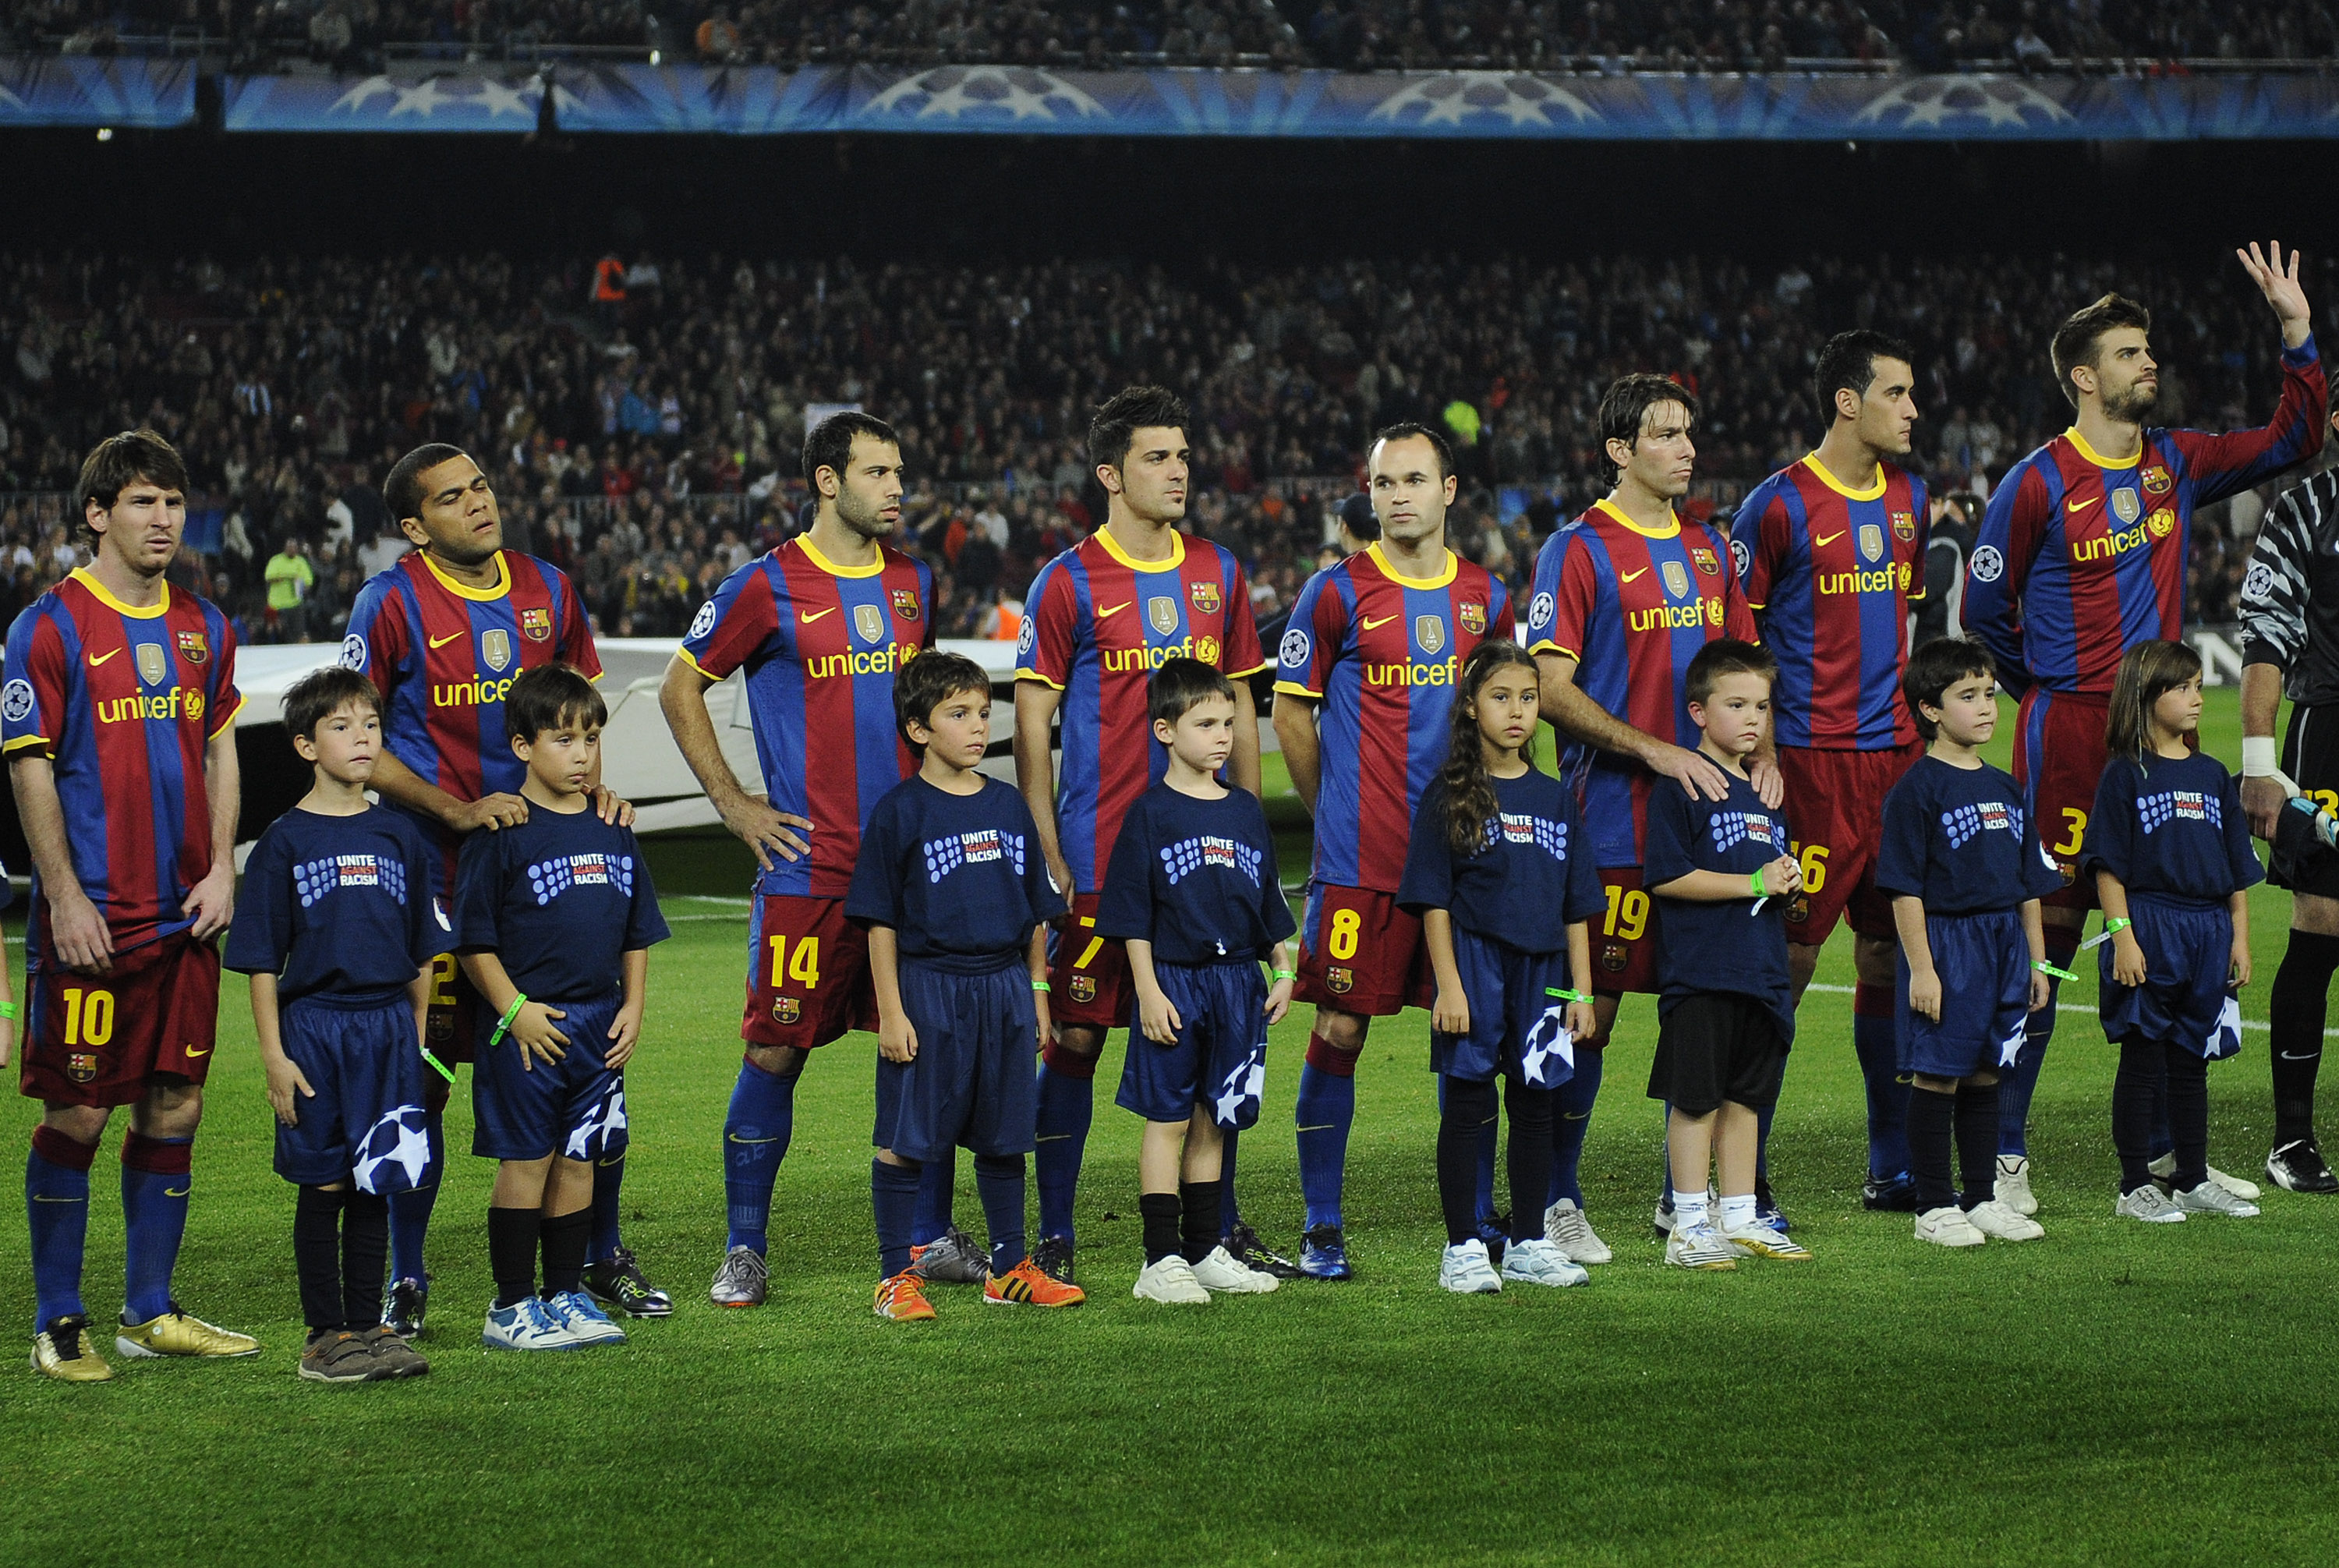 BARCELONA, SPAIN - OCTOBER 20:  Children wearing 'United against Racism T-shirts' pose with Barcelona players prior the start of the UEFA Champions League group D match between Barcelona and FC Copenhagen at the Camp nou stadium on October 20, 2010 in Bar